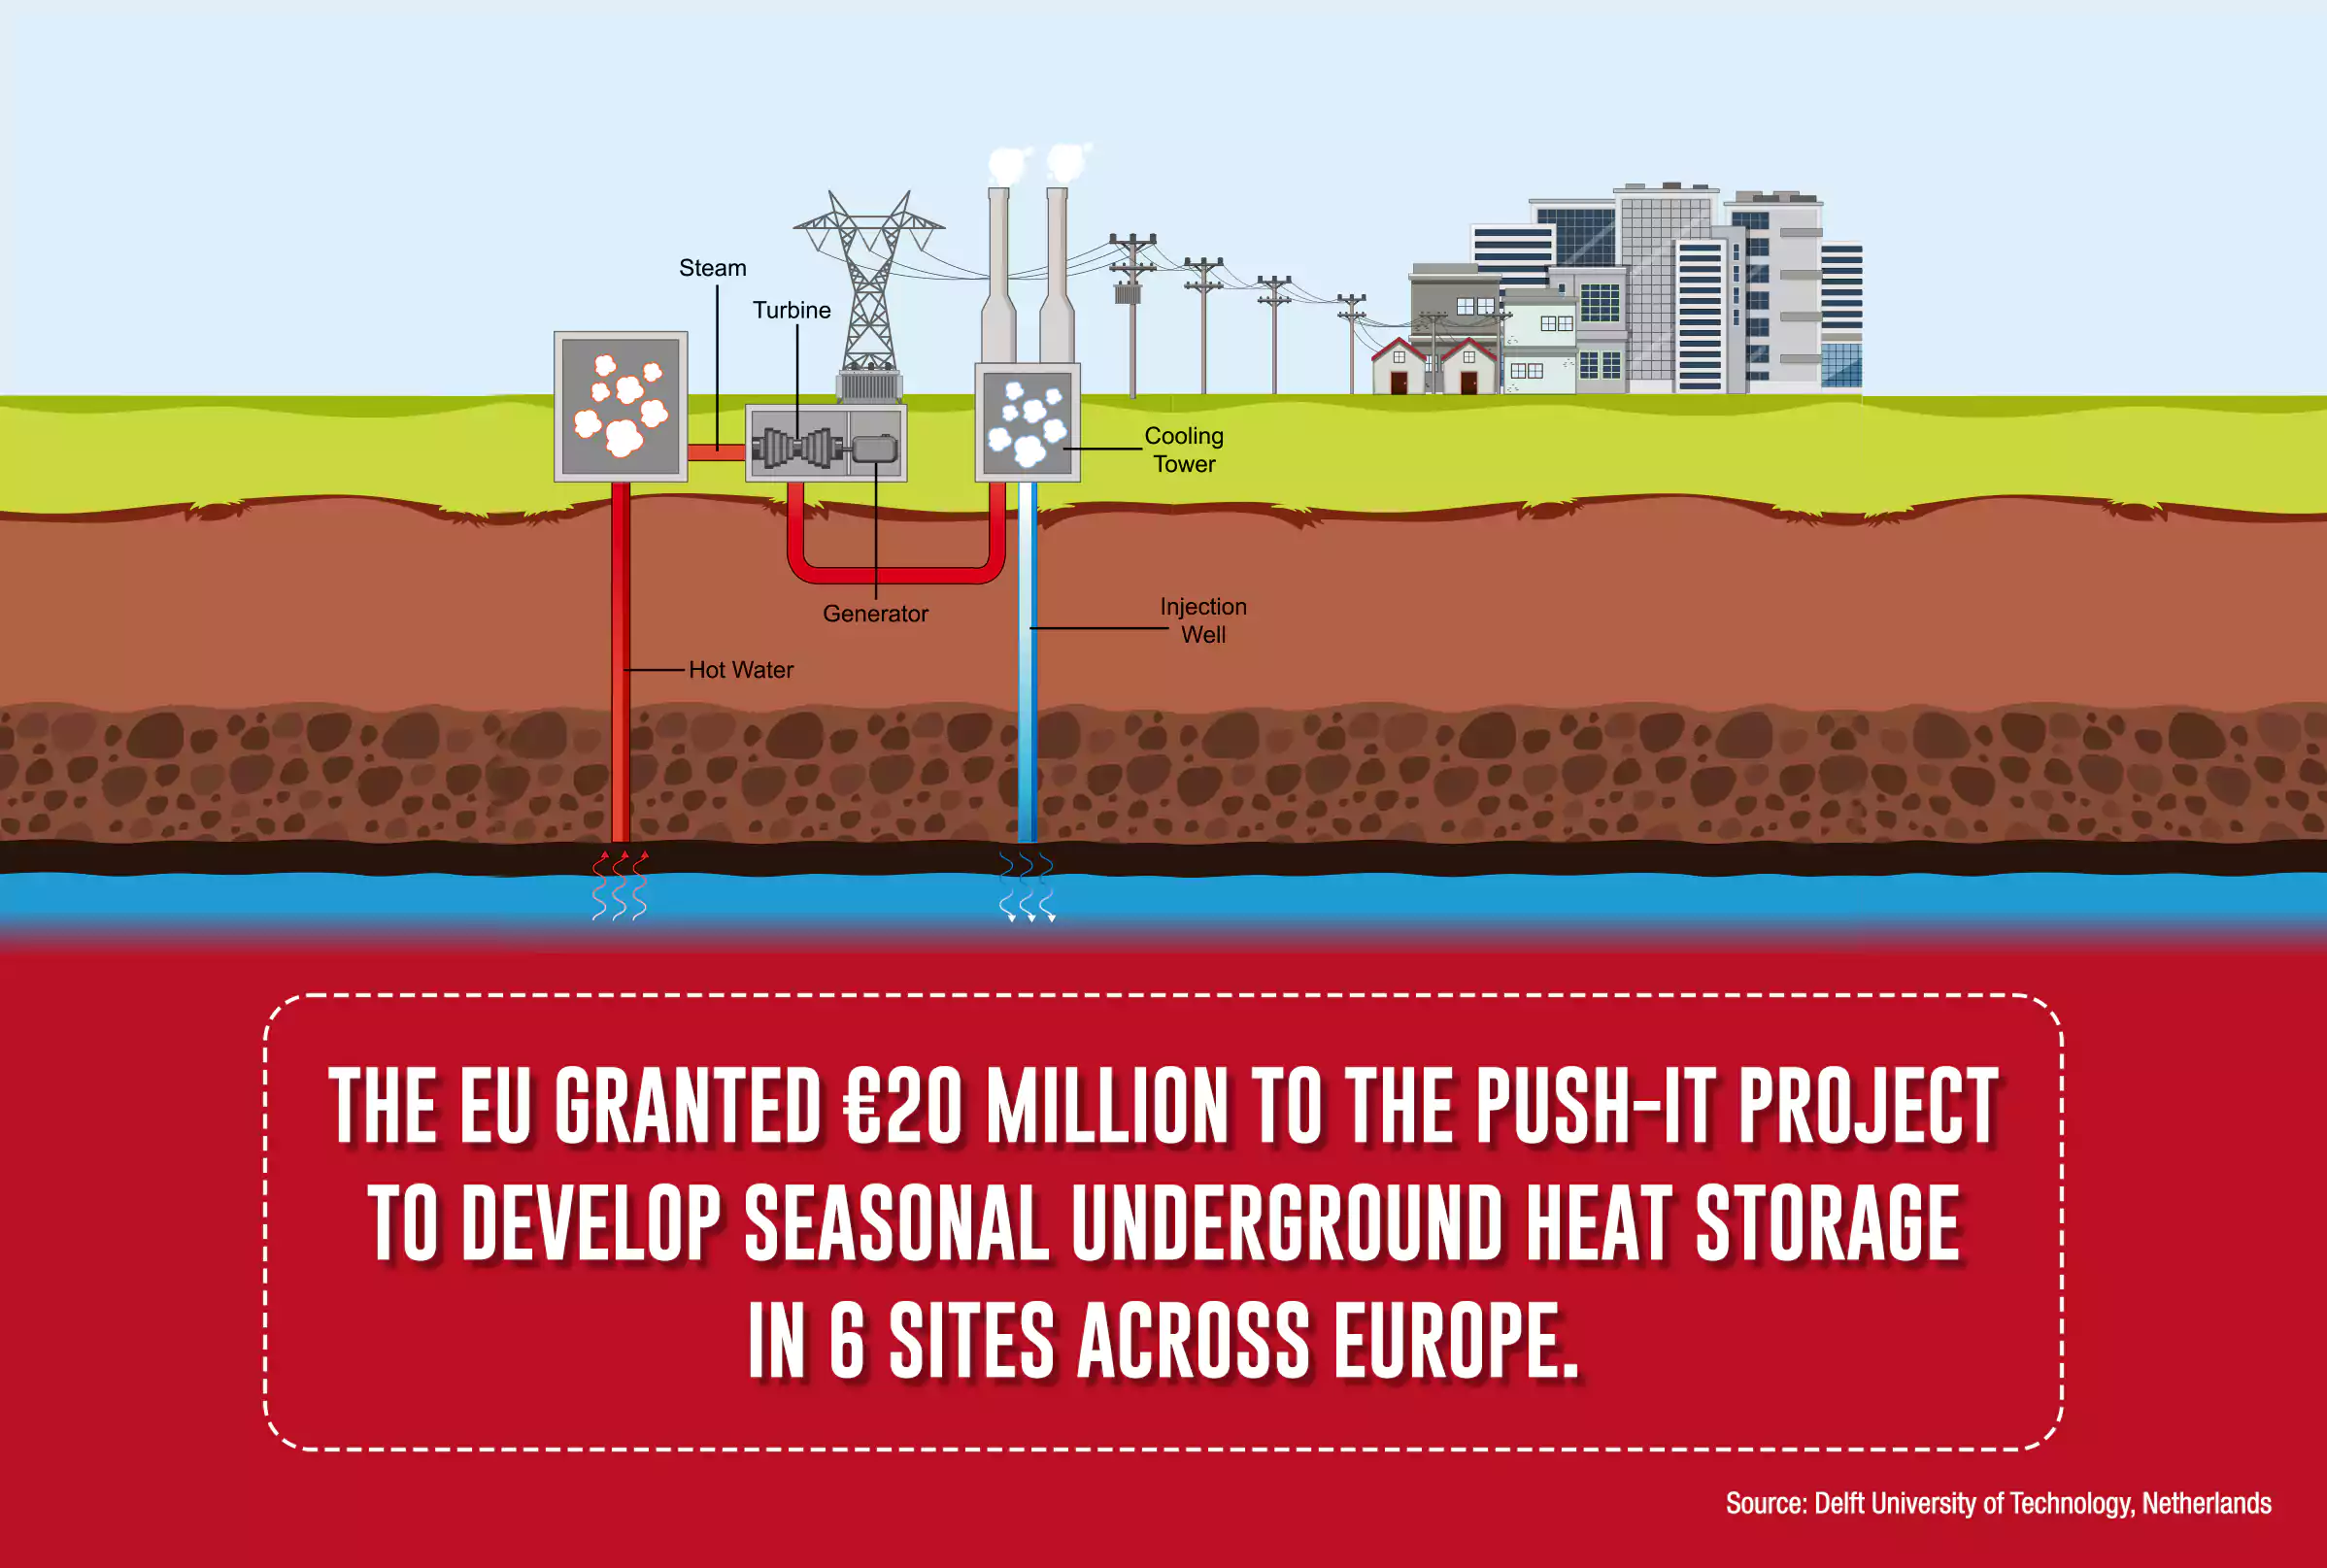 The PUSH-IT Project uses renewables like geothermal or solar energy